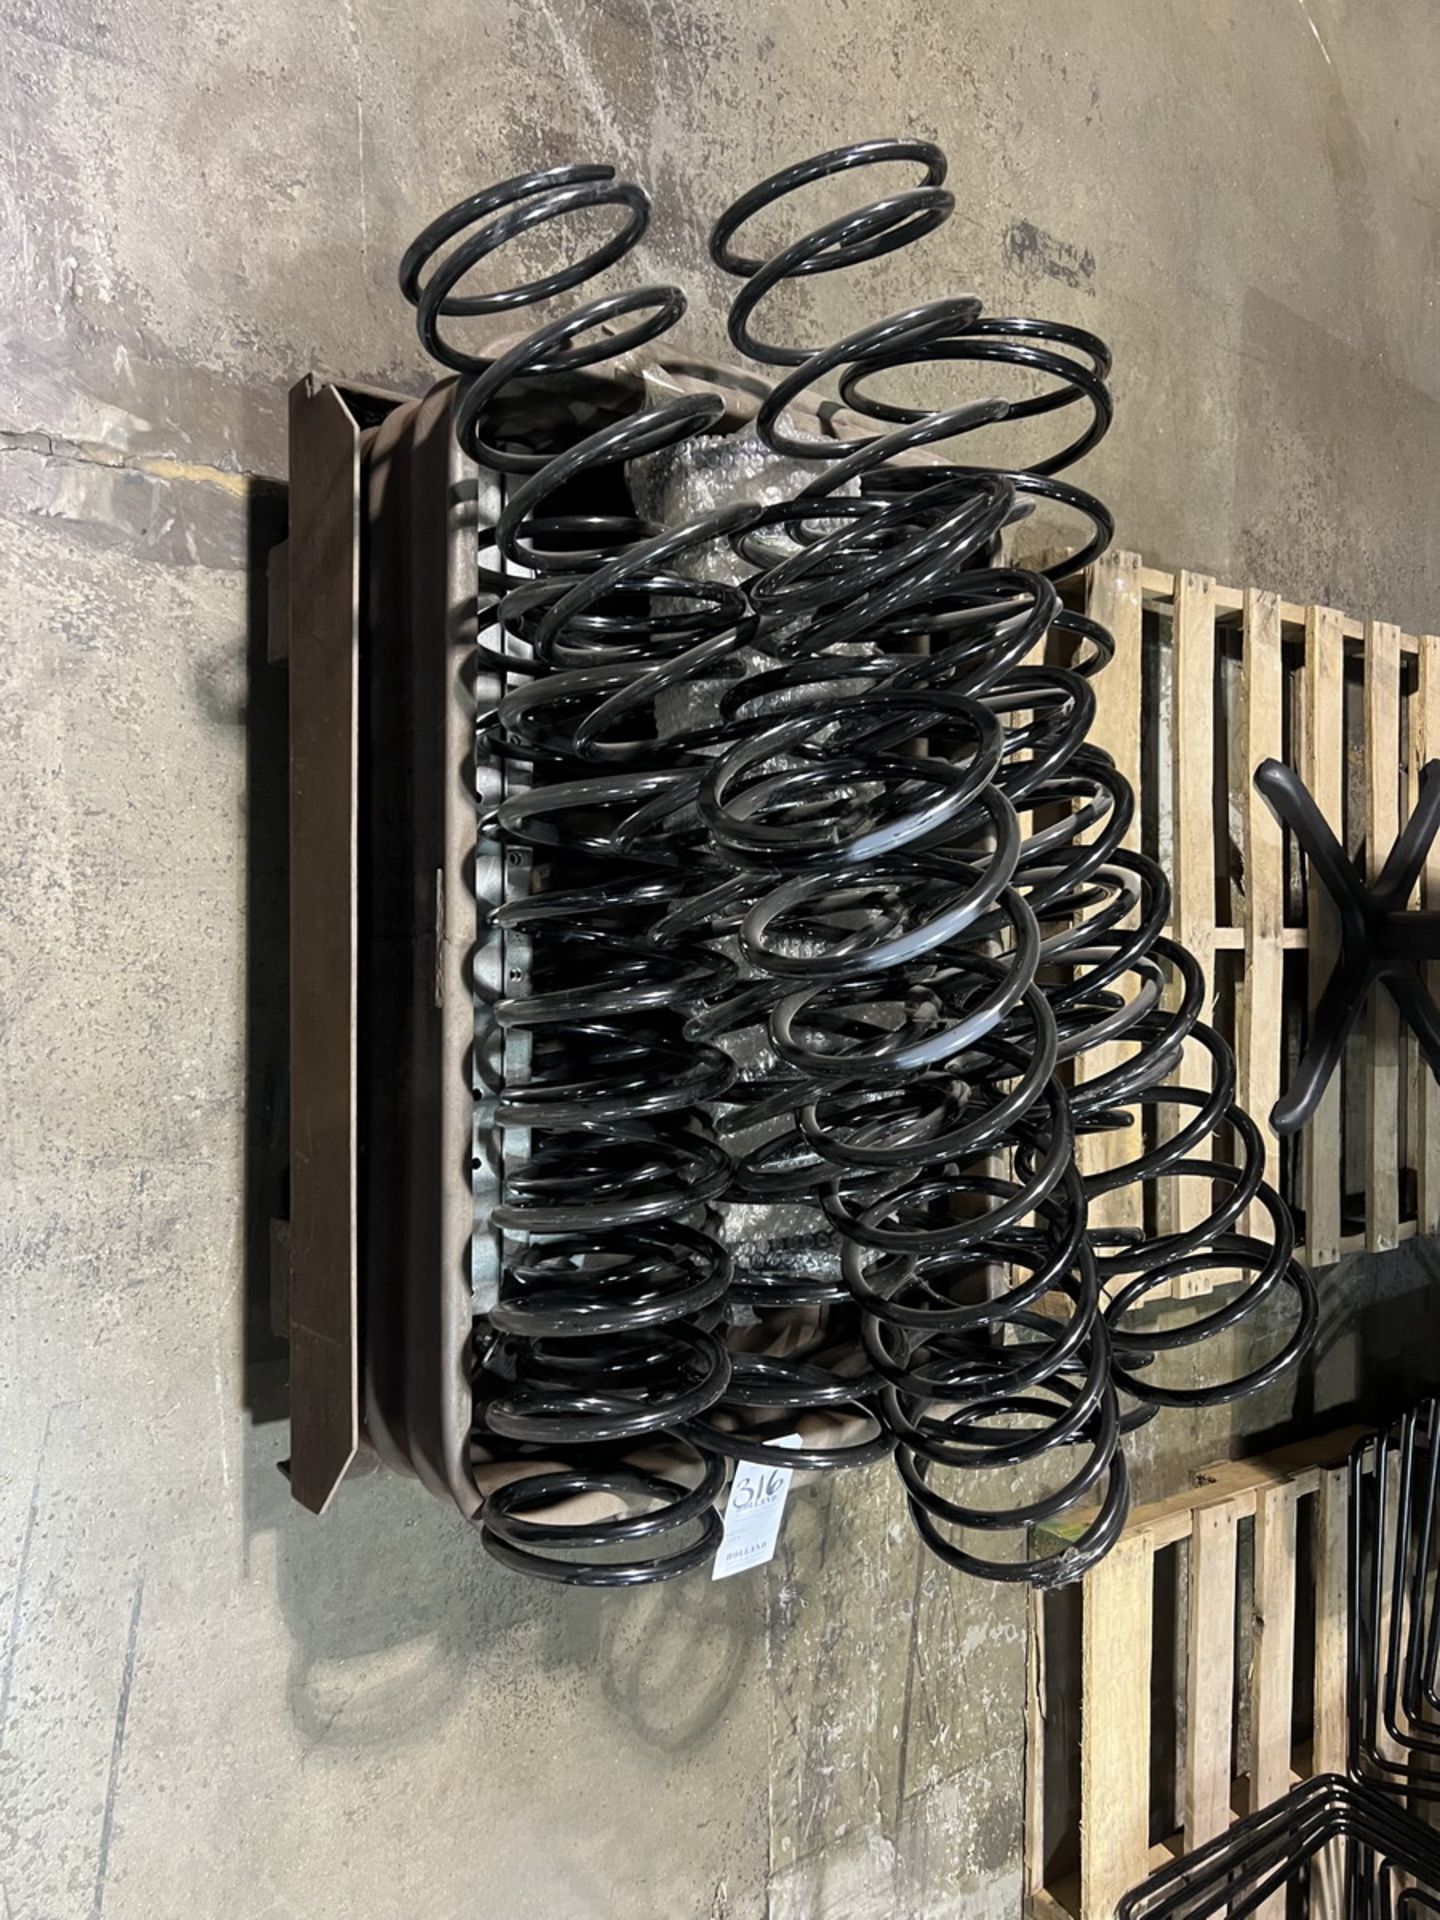 Lot of Assorted Lift Table Springs - Image 2 of 2